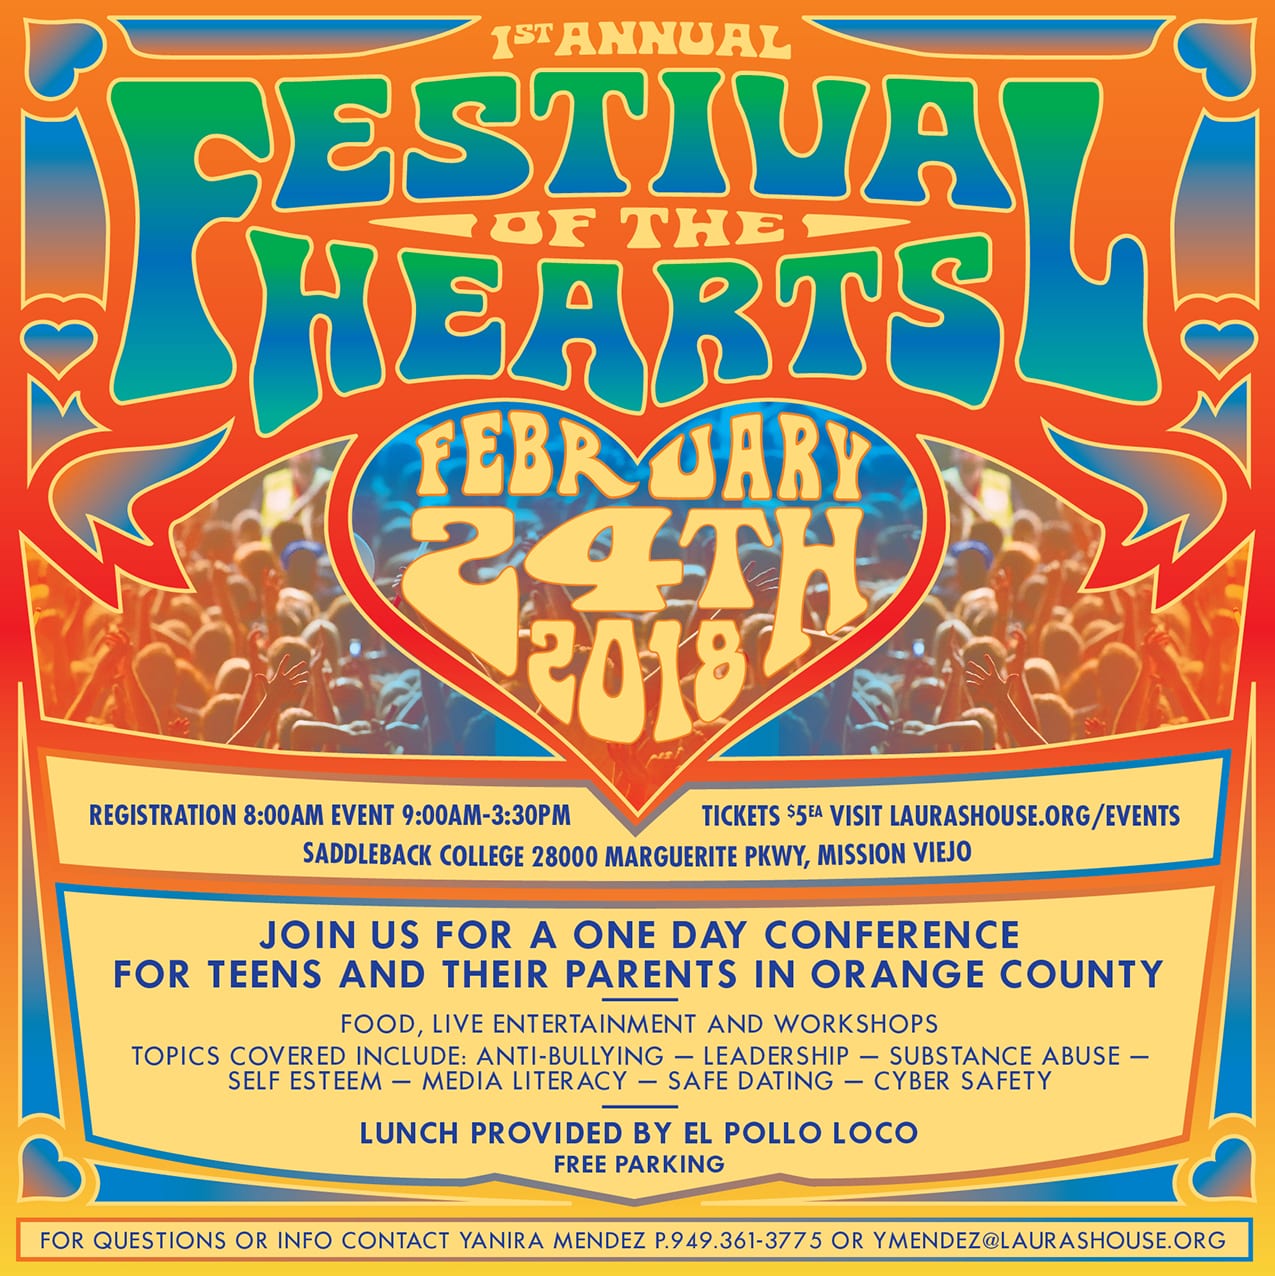 First Annual Festival of the Hearts